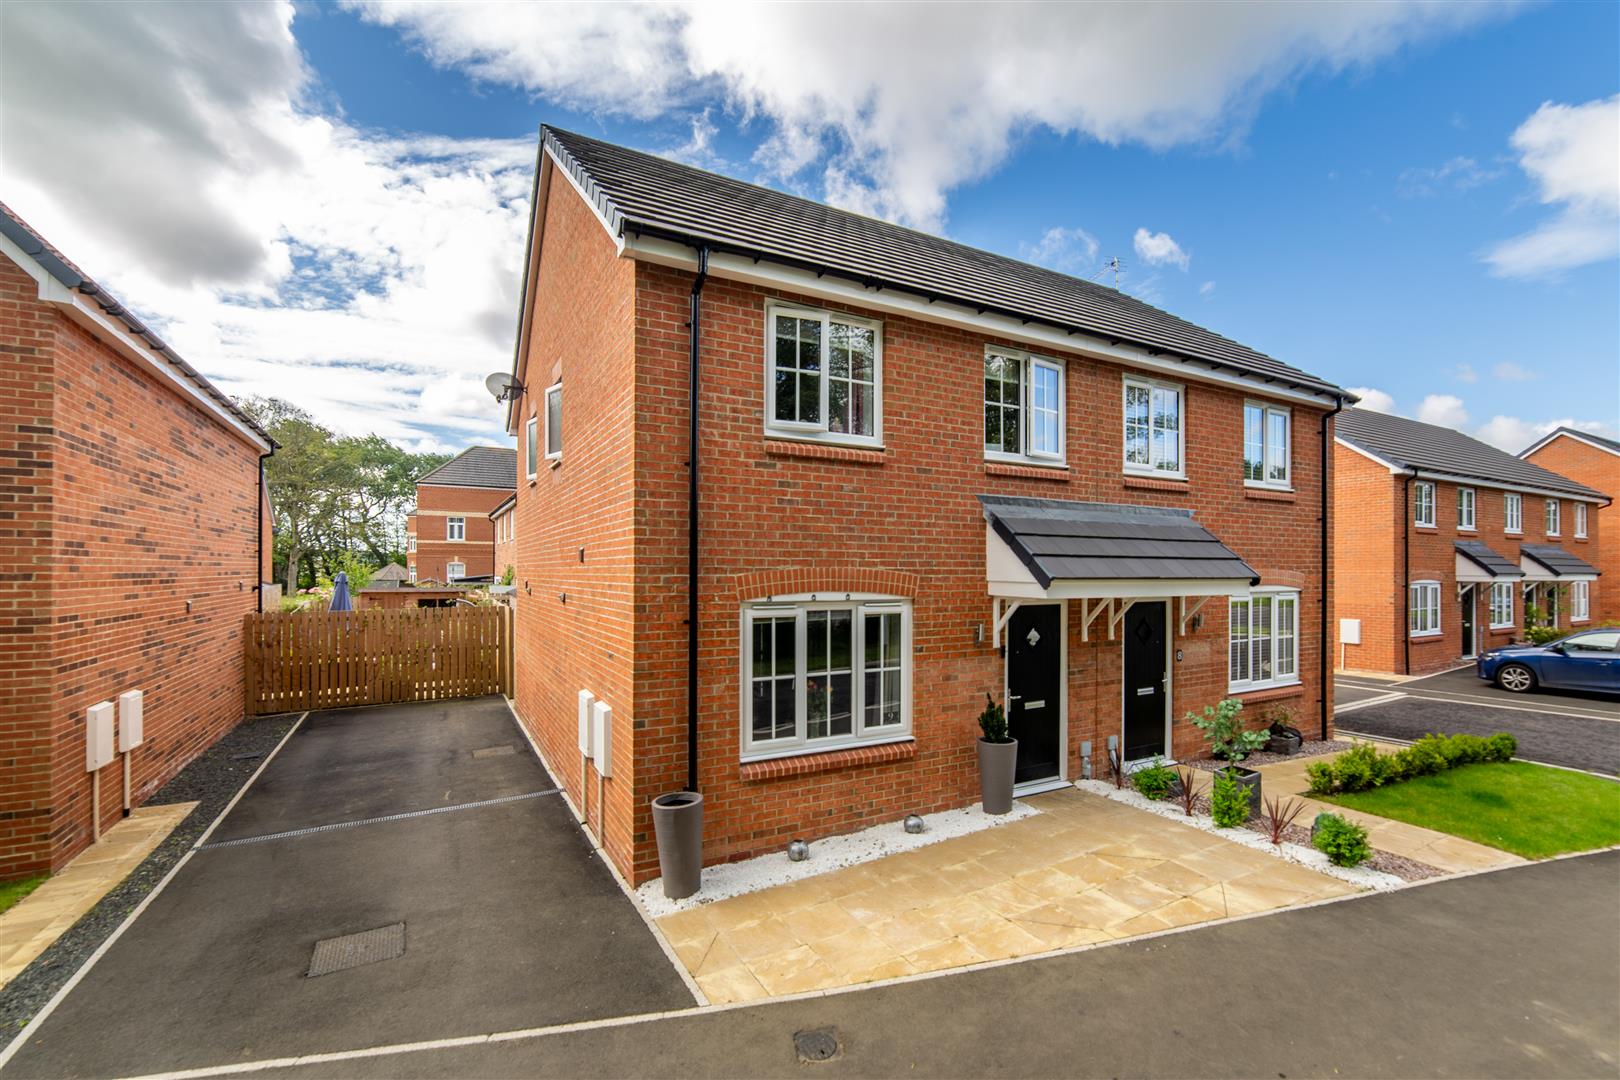 3 bed semi-detached house for sale in Ashley Gardens, Morpeth, NE61